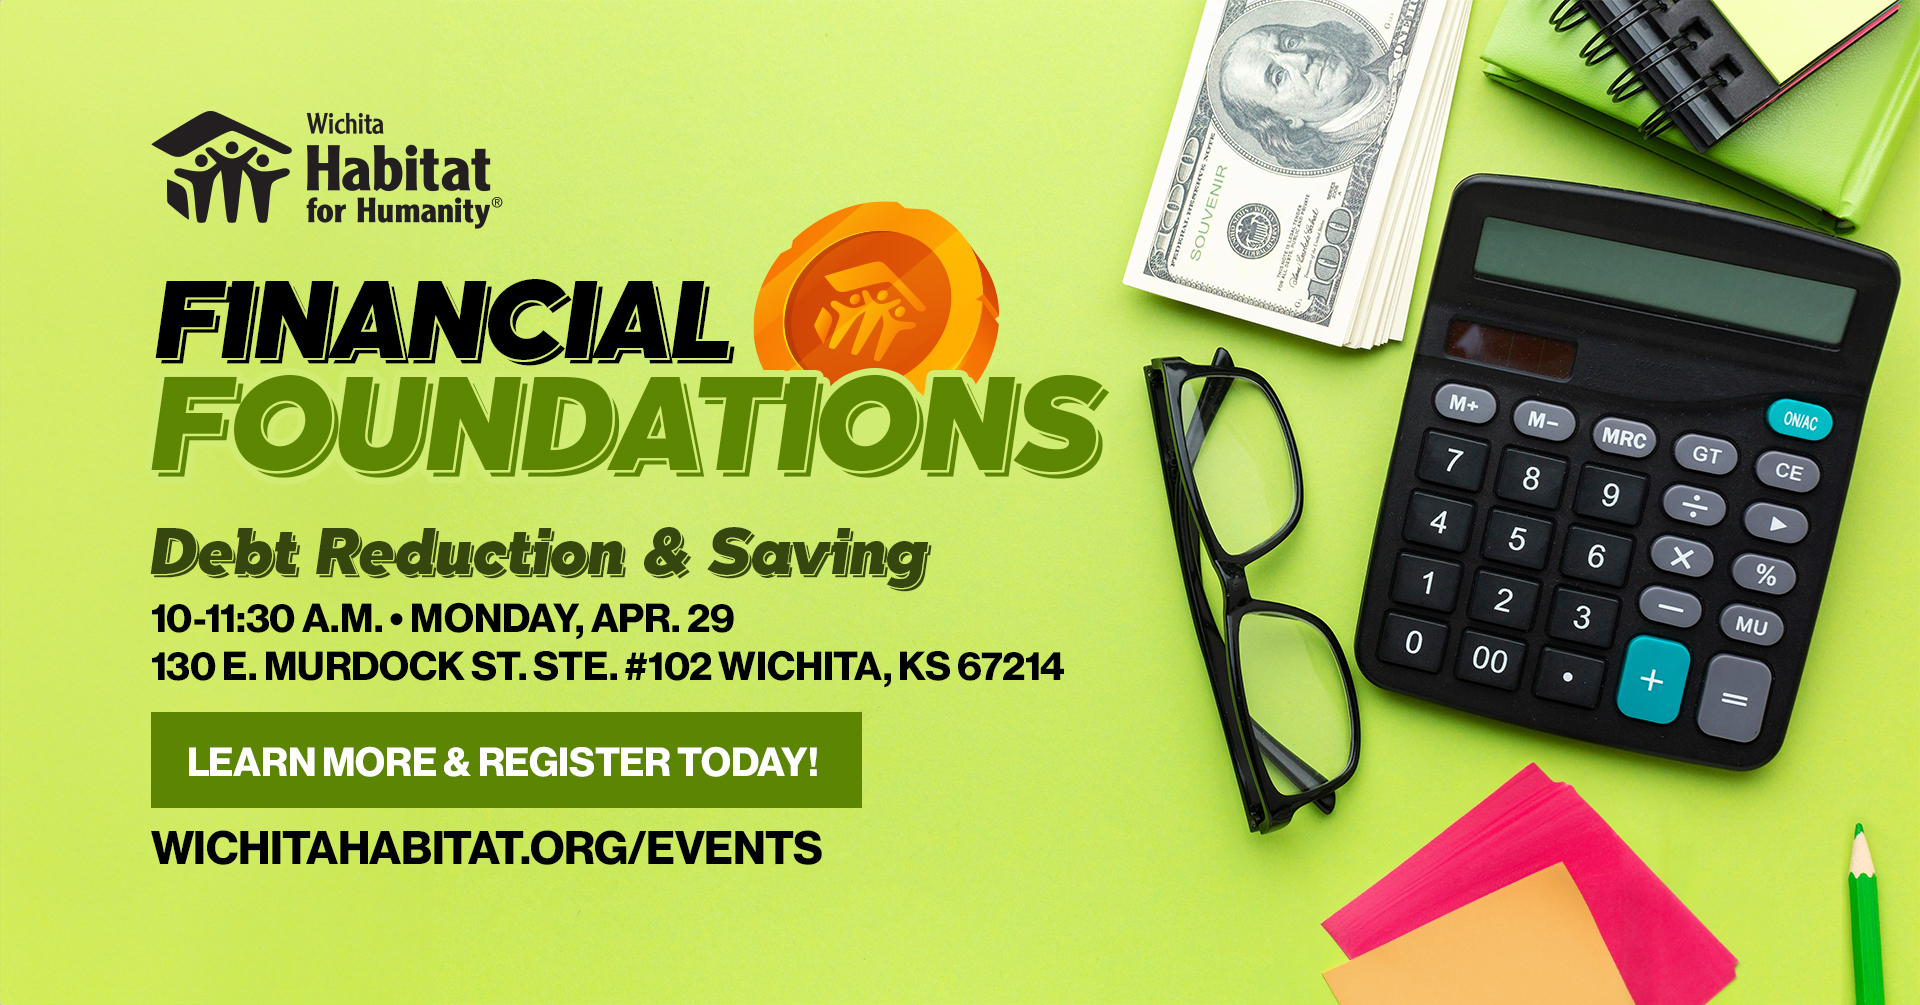 Financial Foundations: Debt Reduction & Saving event banner, 10-11:30 a.m., Monday, Apr. 29, 130 E. Murdock St. Ste. #102 Wichita, KS 67214, Learn more and register today! wichitahabitat.org/events